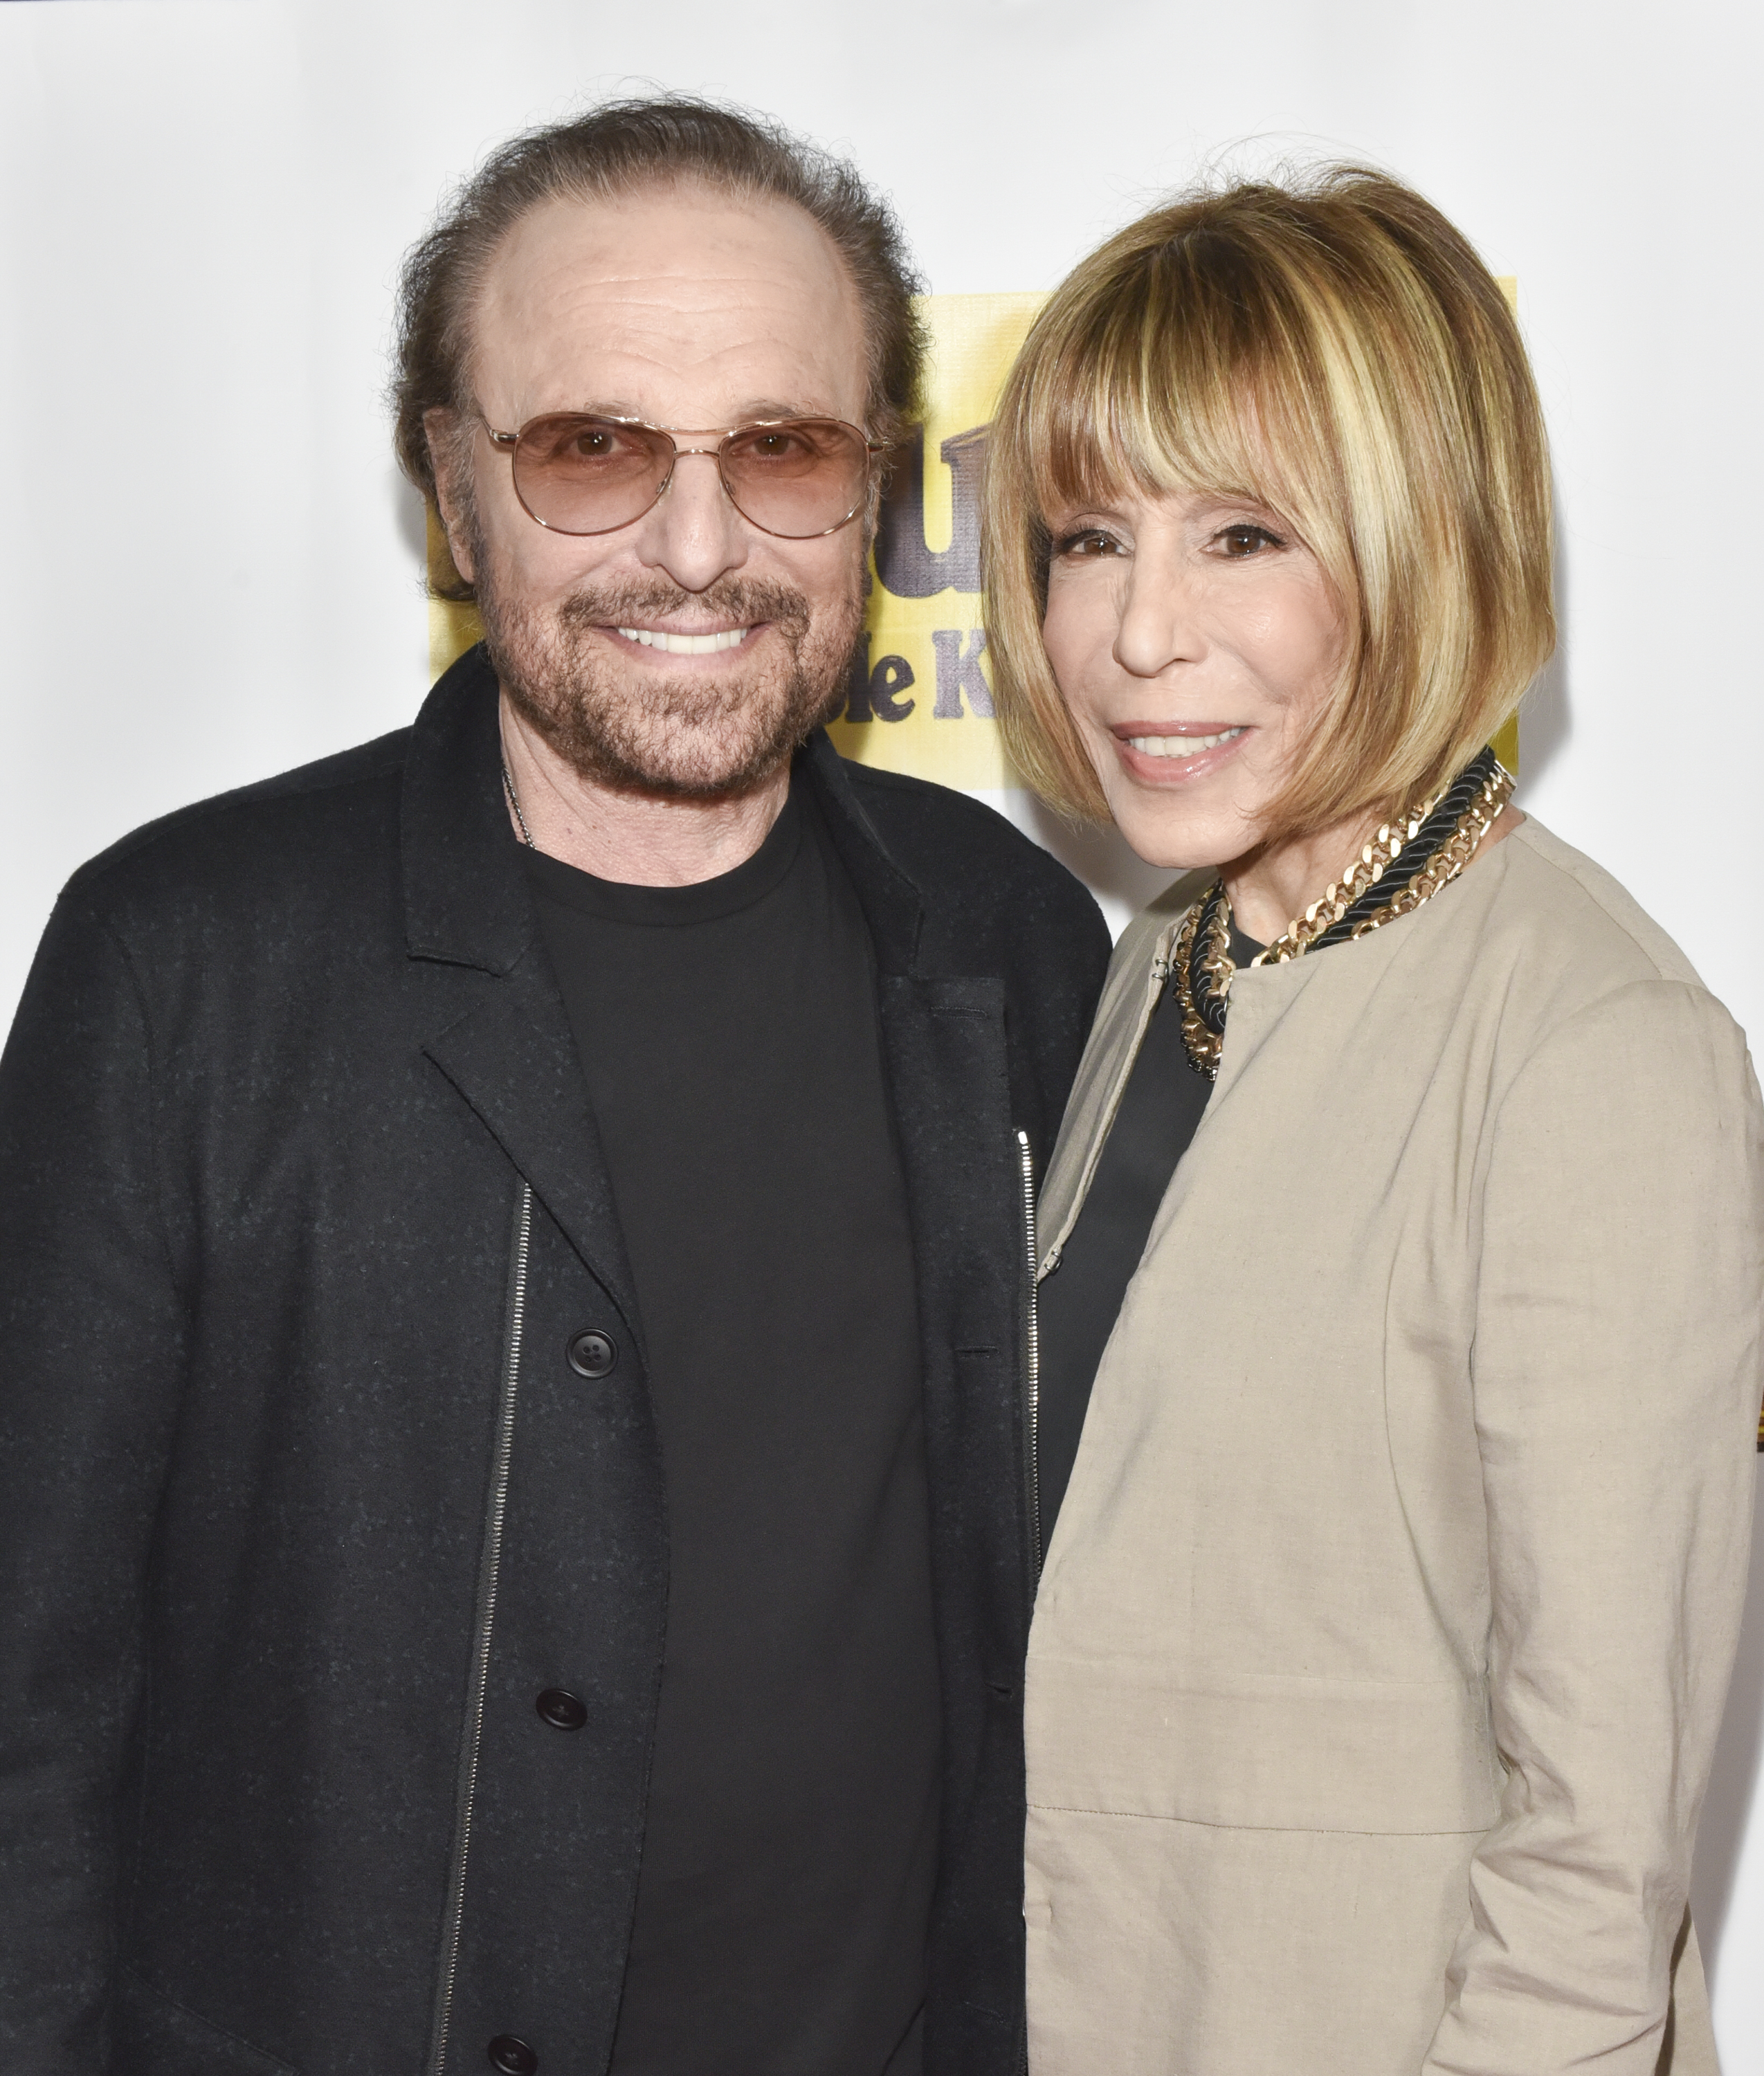 Barry Mann and Cynthia Well pose at the premiere of "Beautiful - The Carole King Musical" at the Pantages Theatre on June 24, 2016, in Hollywood, California | Source: Getty Images